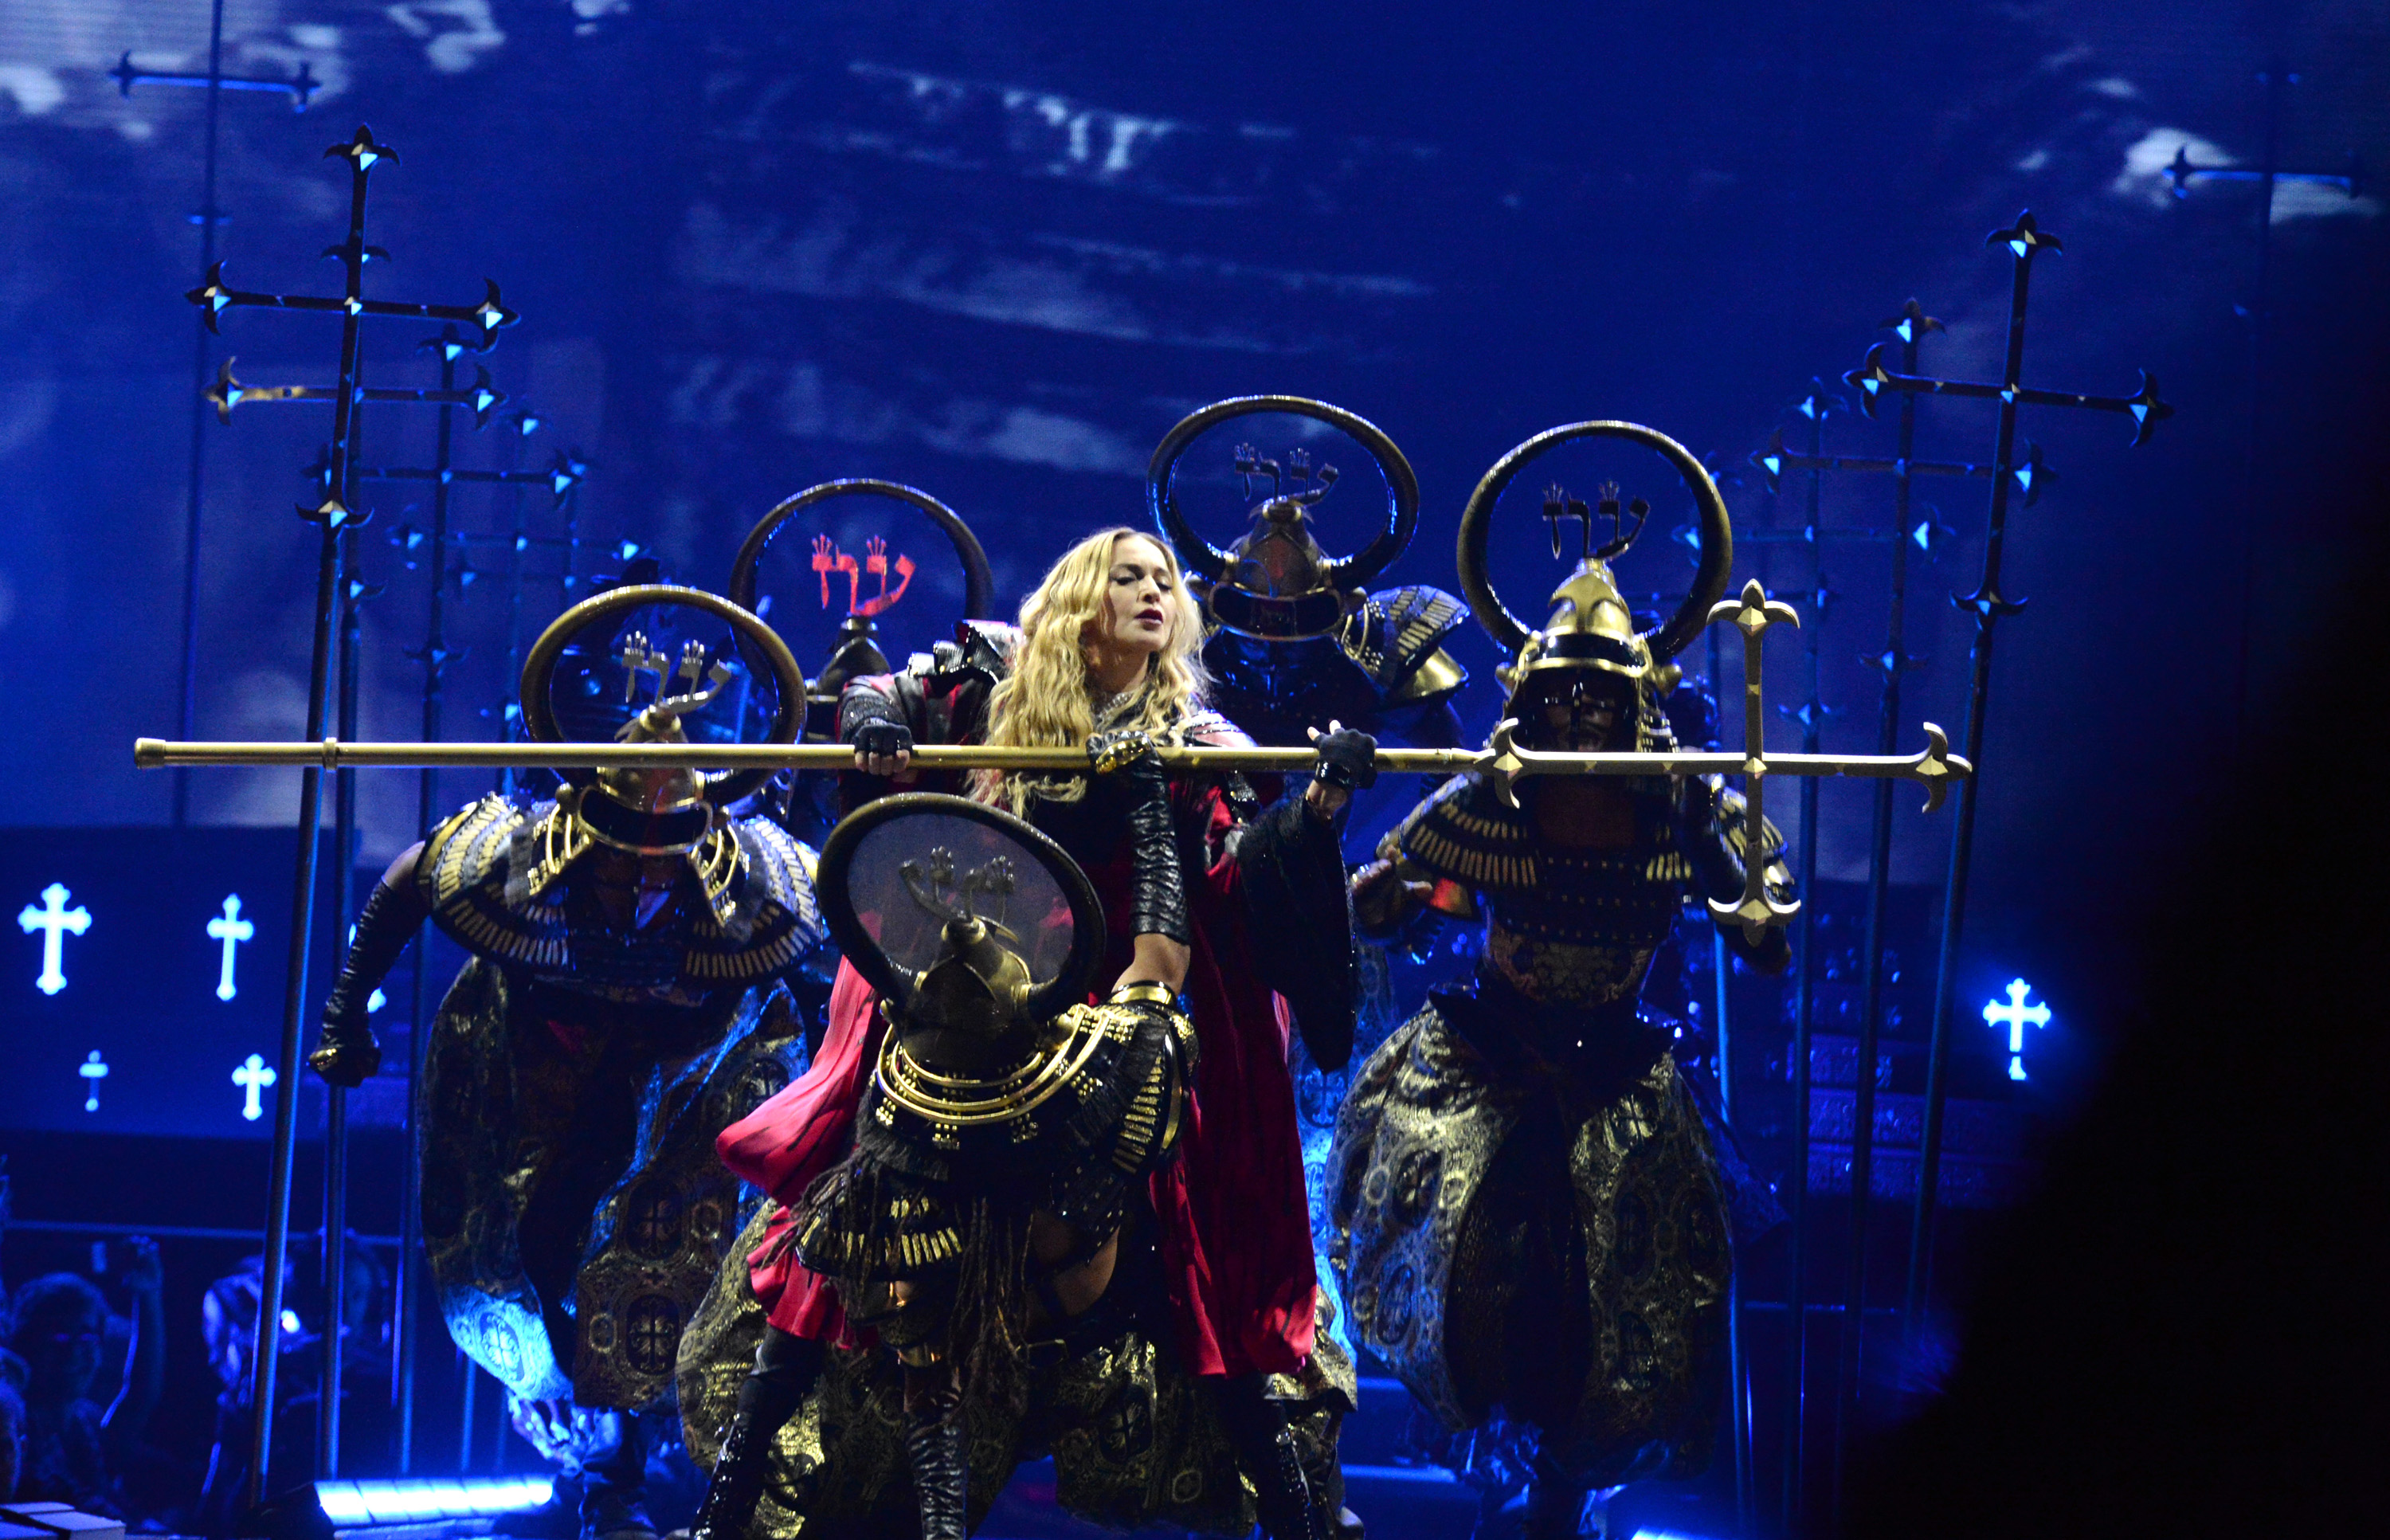 MONTREAL, QC - SEPTEMBER 09:  Madonna performs onstage during her "Rebel Heart" tour opener at Bell Centre on September 9, 2015 in Montreal, Canada.  (Photo by Kevin Mazur/Getty Images for Live Nation)